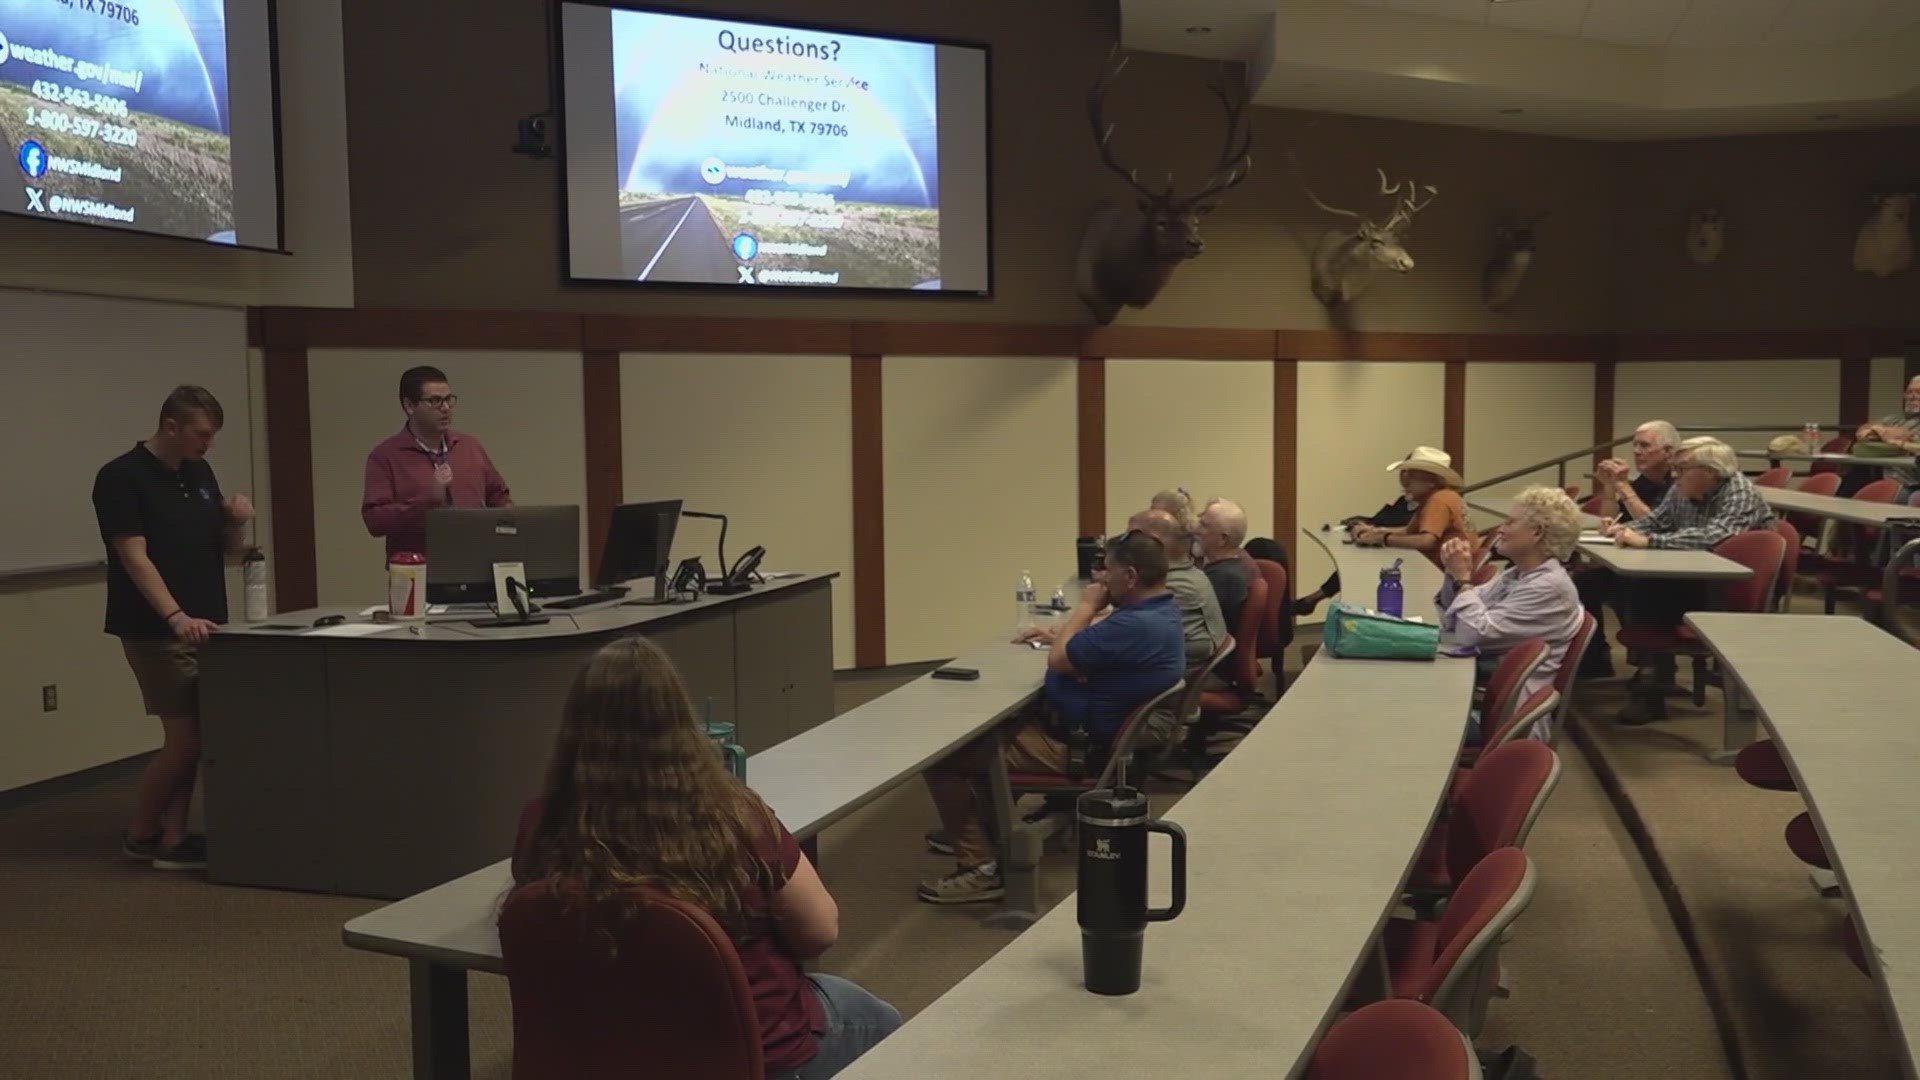 NewsWest 9 Chief Meteorologist Jordan Frazier was at the Skywarn Training and got to speak with a member of the National Weather Service.